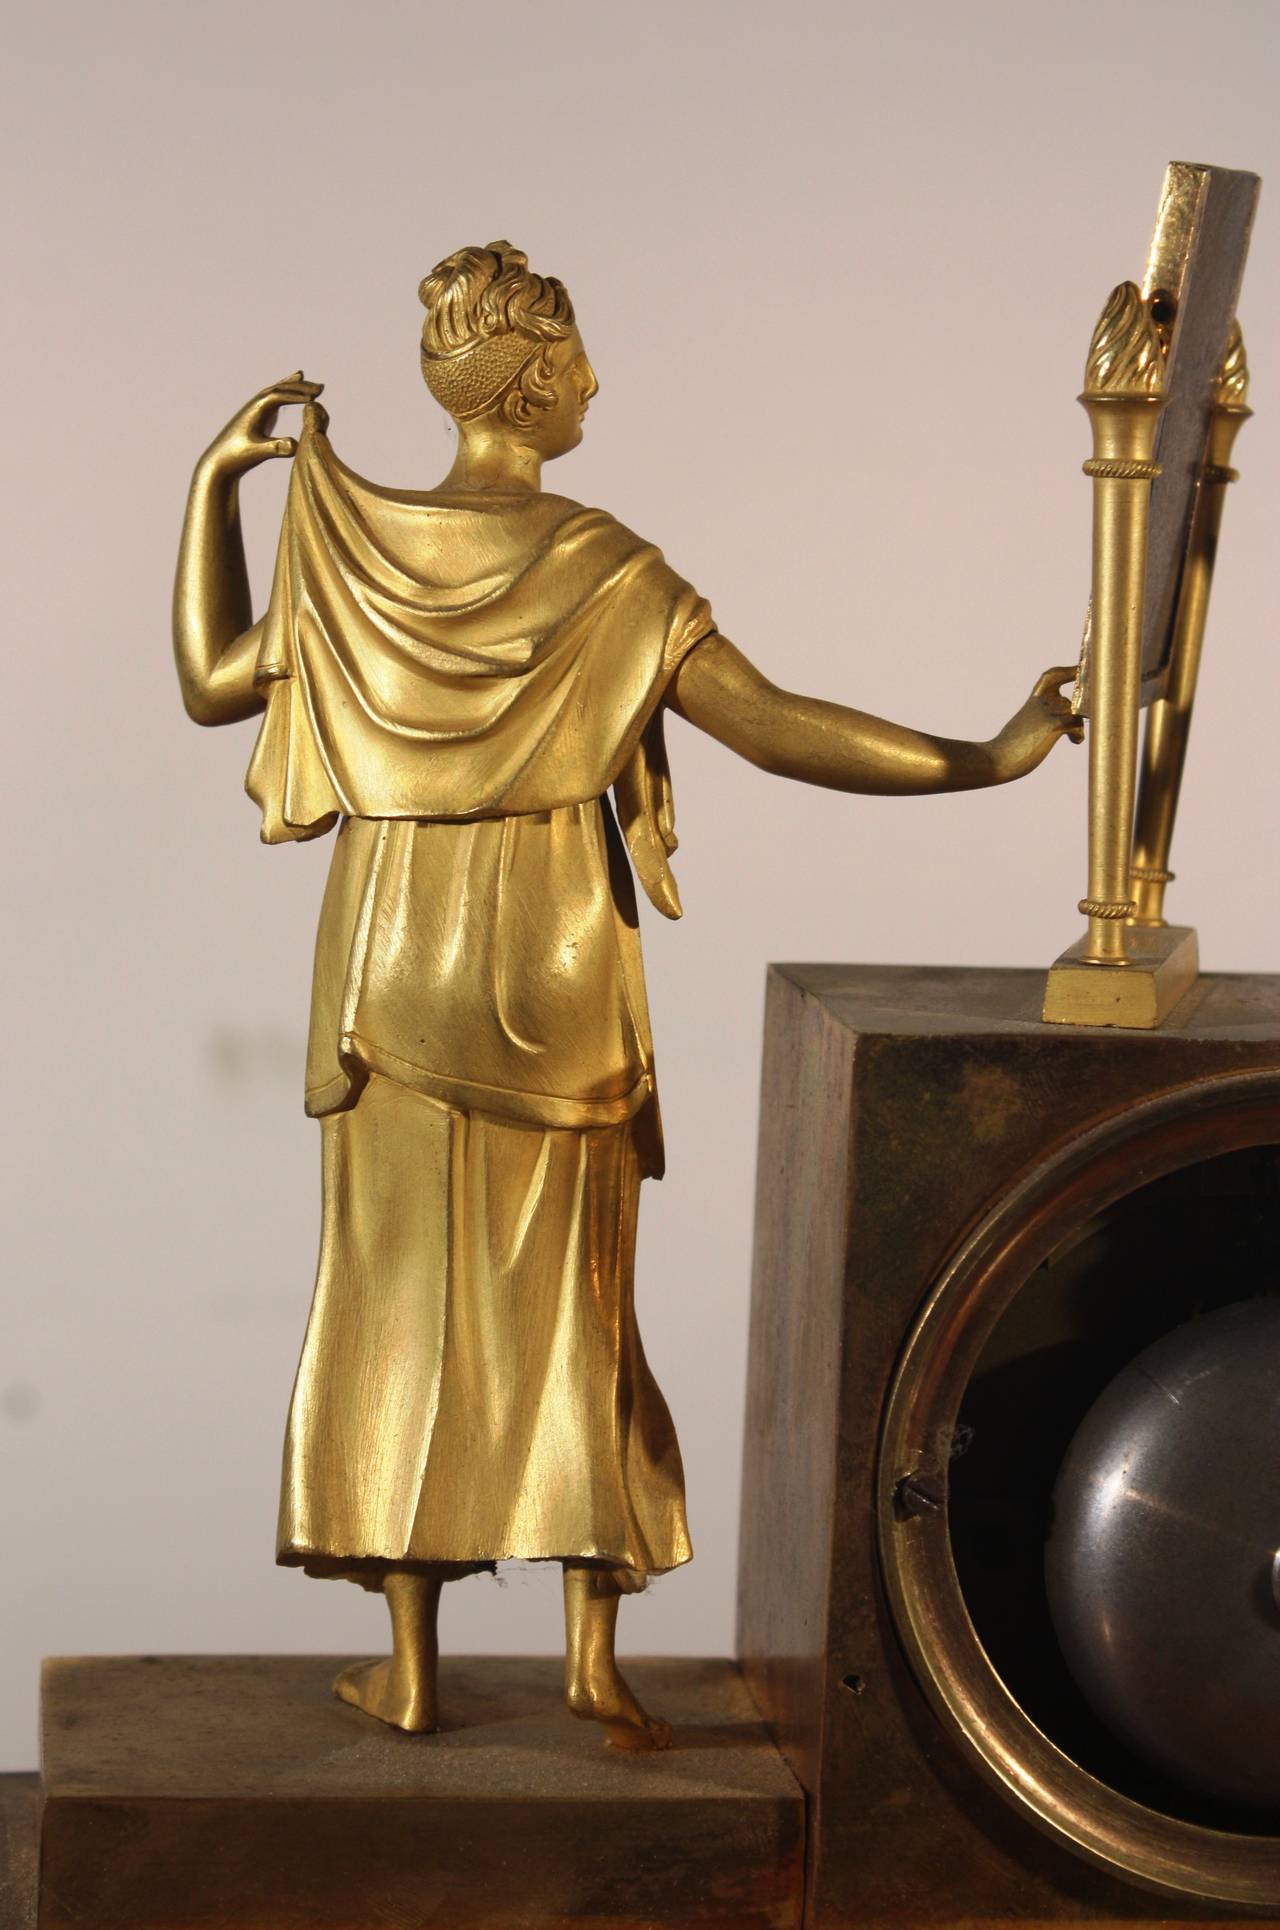 A charming French figural mantel clock, circa 1800 in gilt bronze in the form of a classically dressed woman standing before a dressing mirror. Clock chimes on the hour and is in good working order.